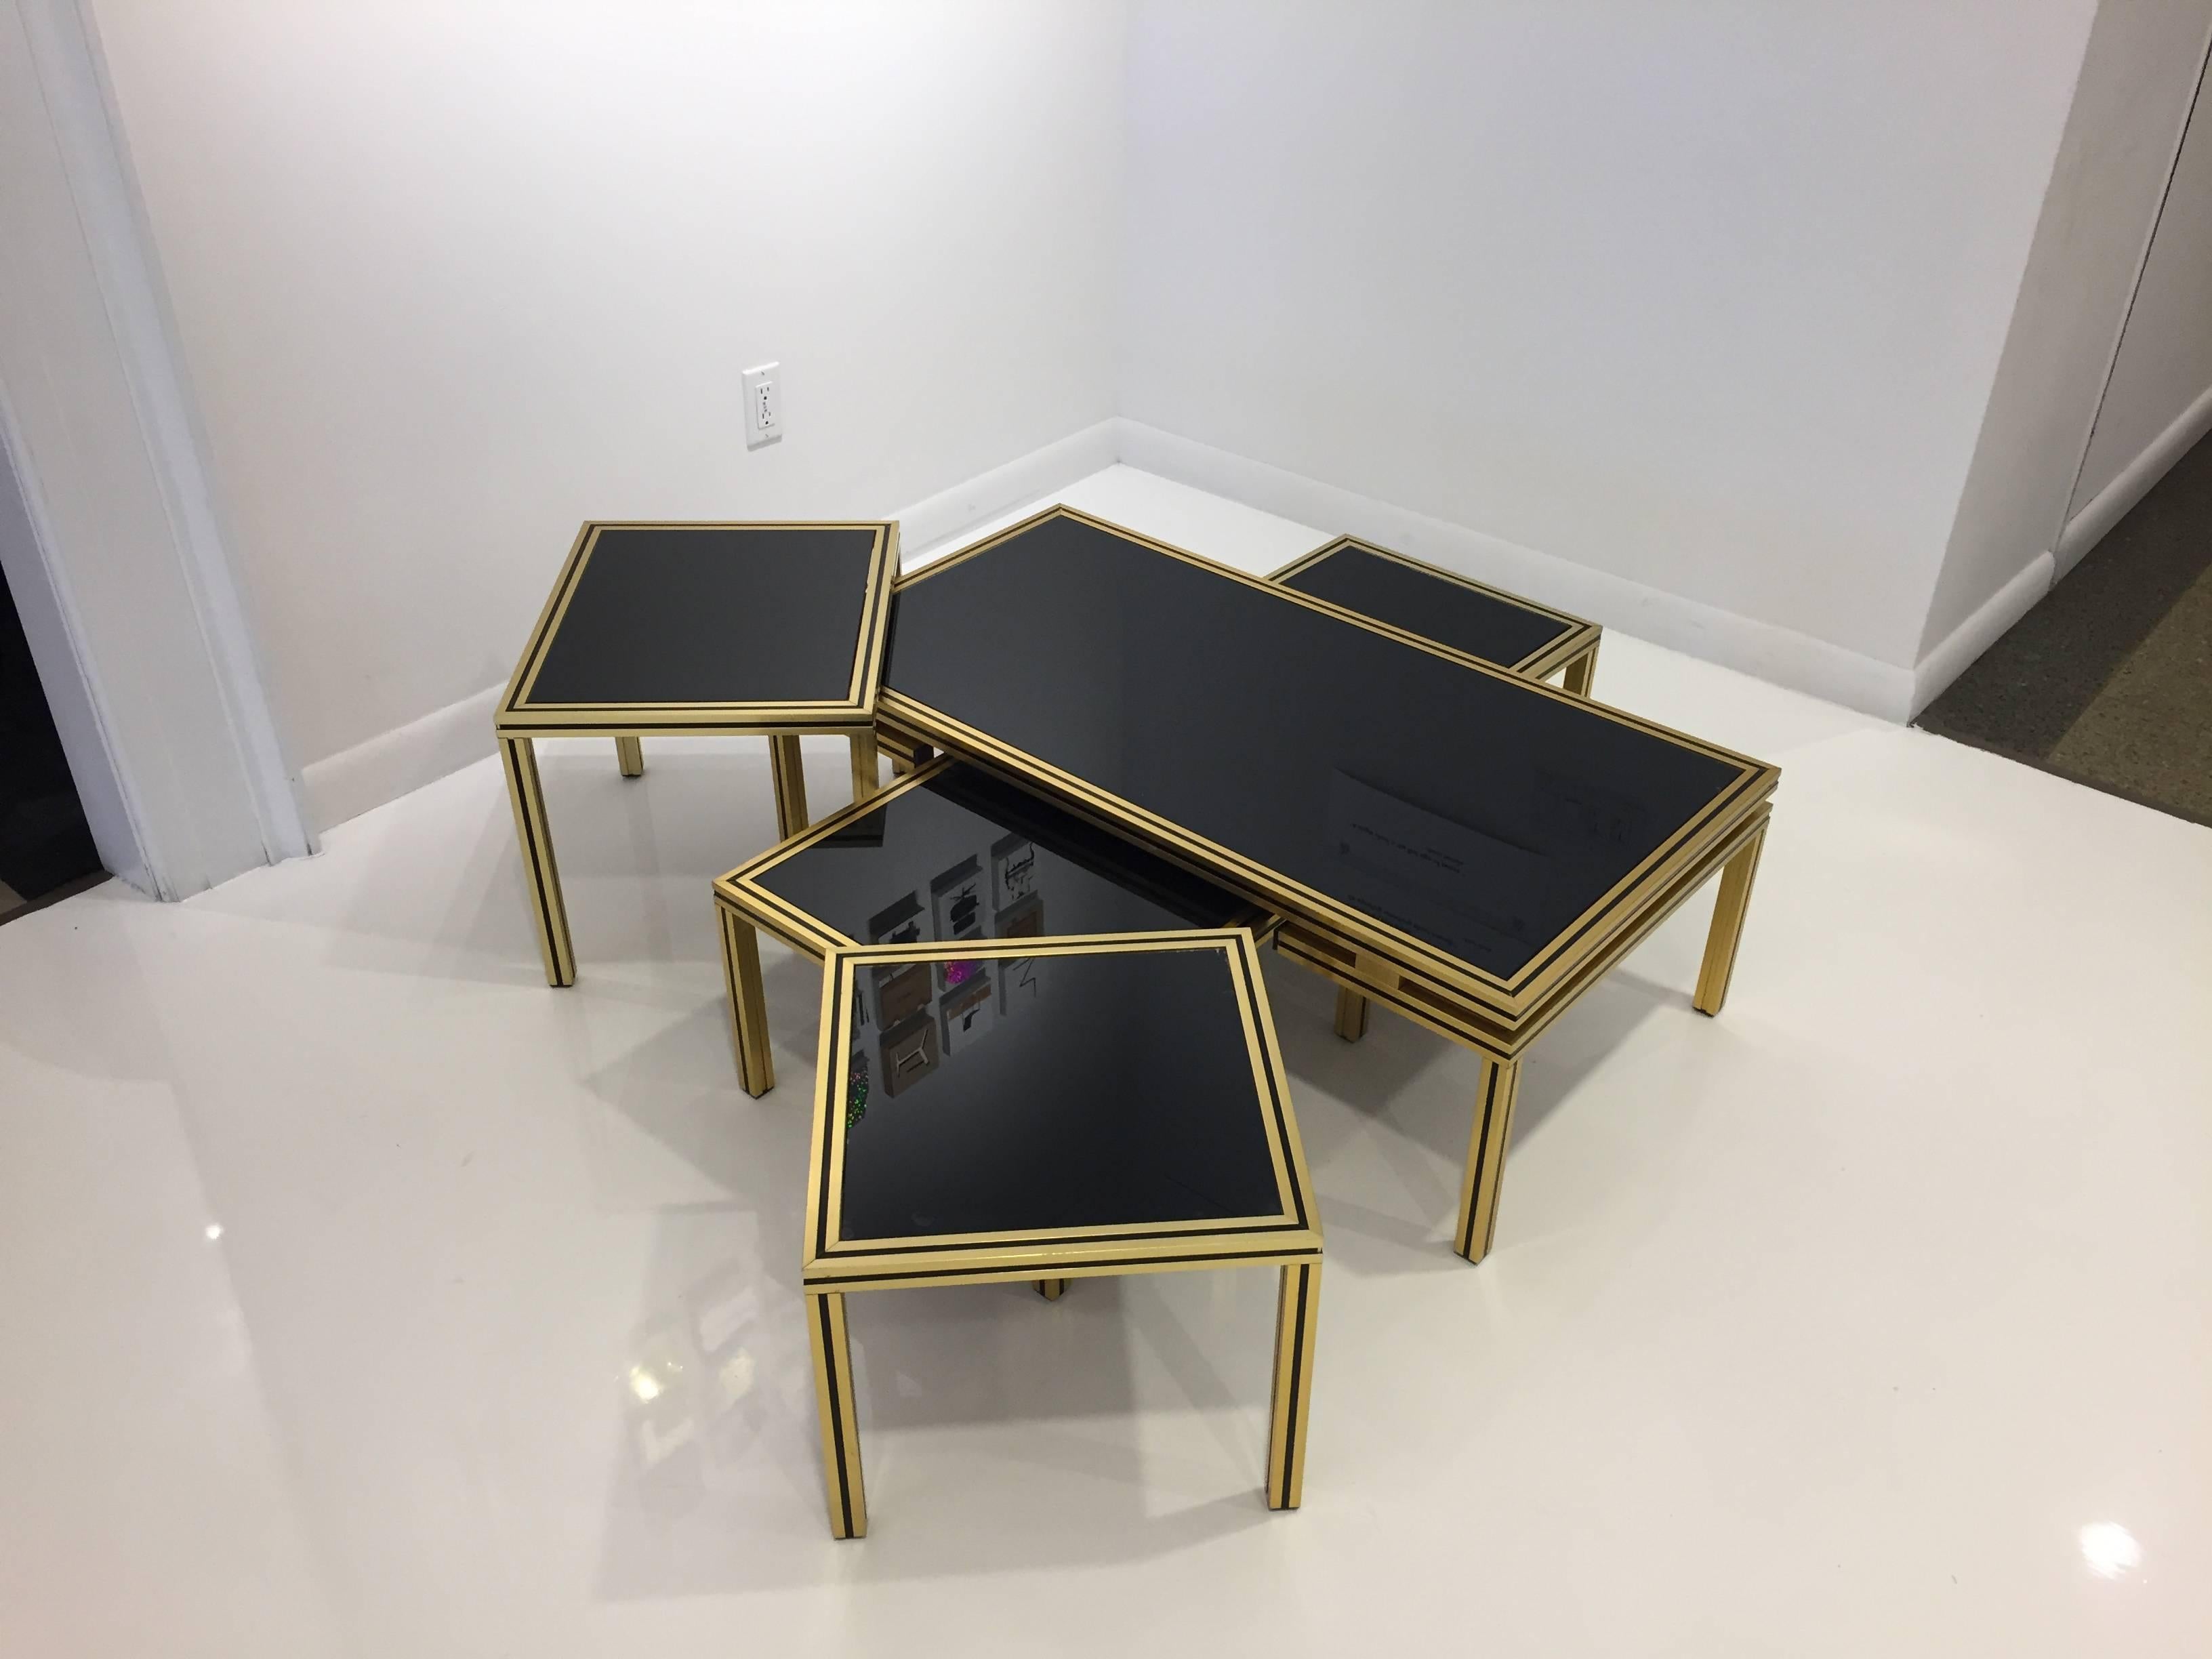 Five tables of the same design which are perfect as one large multi-layered coffee table or as one coffee table with a separate set of three nesting side tables. Brass coated aluminum frames with black insets, painted glass tops.
Measure: Table